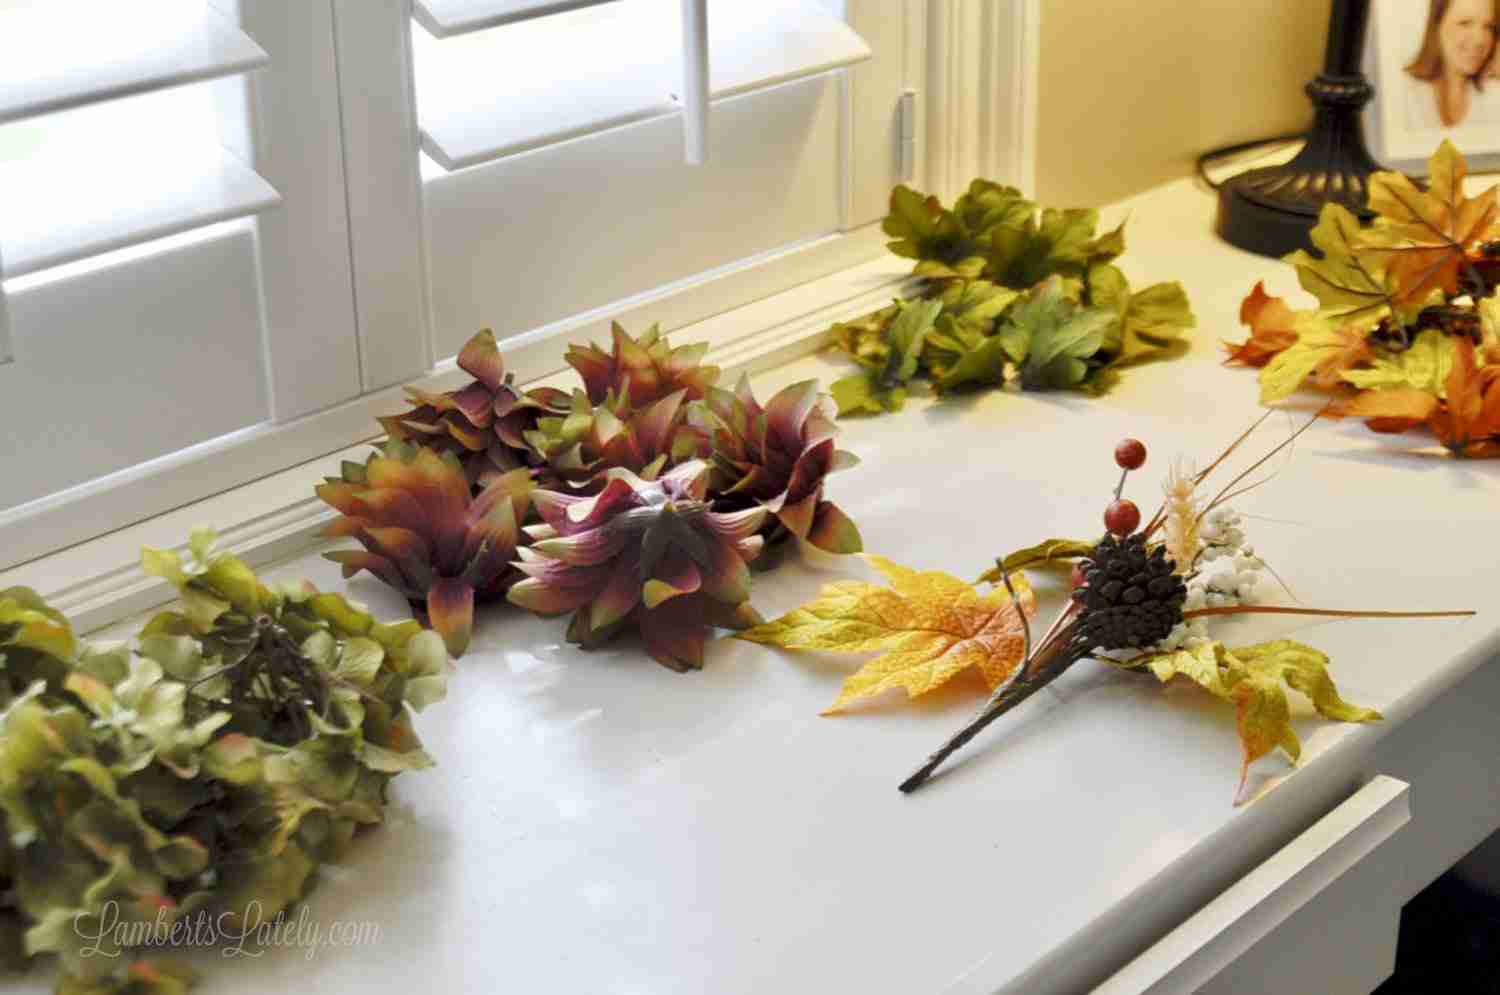 organizing florals and leaves by size